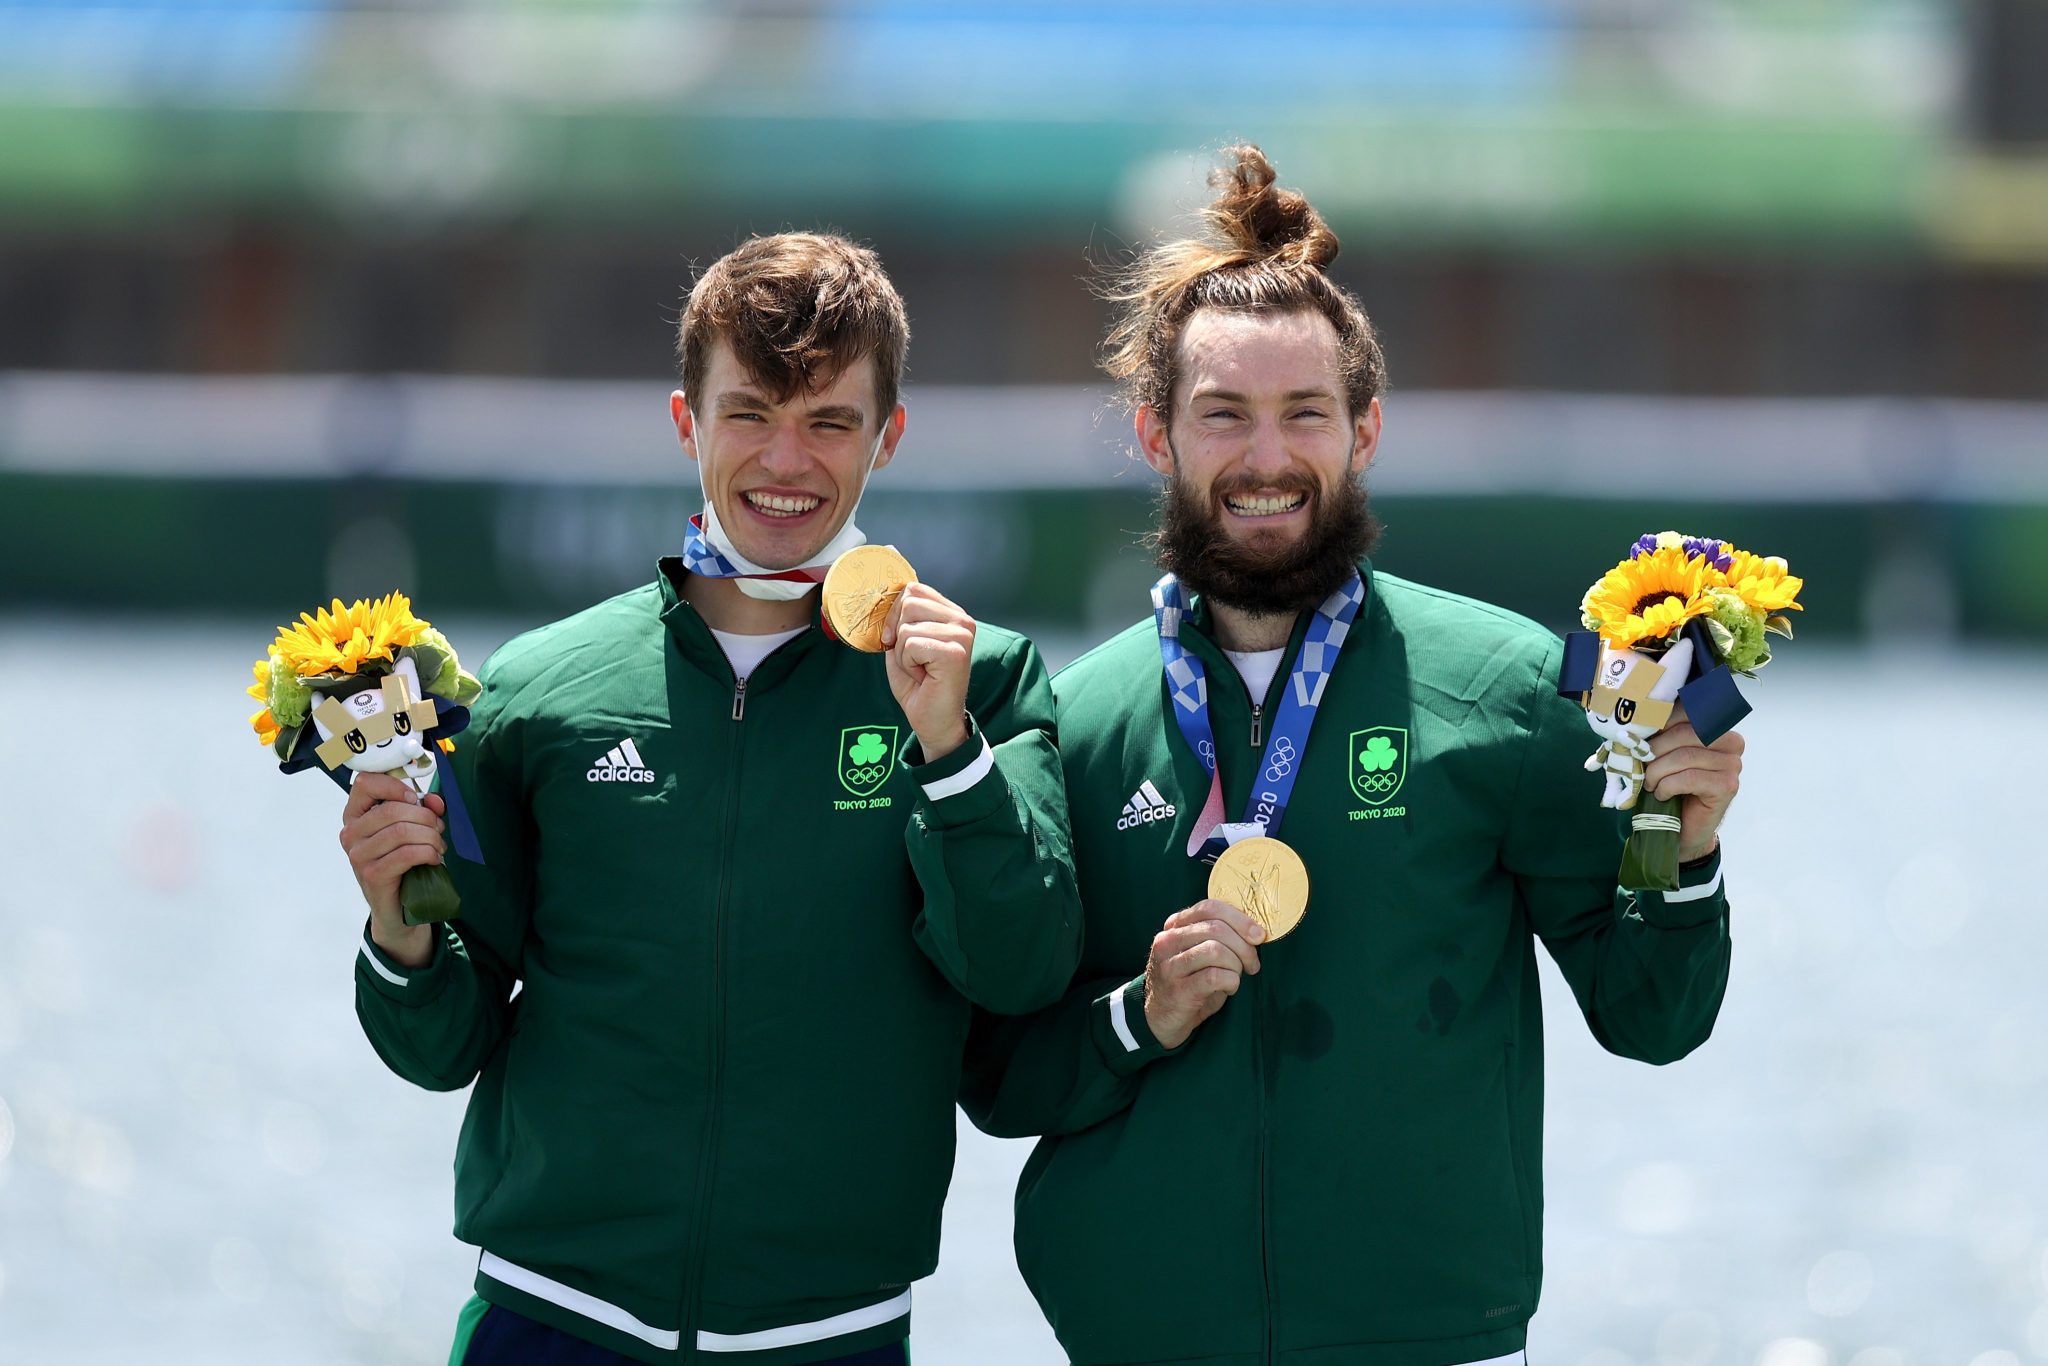 WATCH: Skibbereen rowers win an Olympic Gold Medal for Ireland